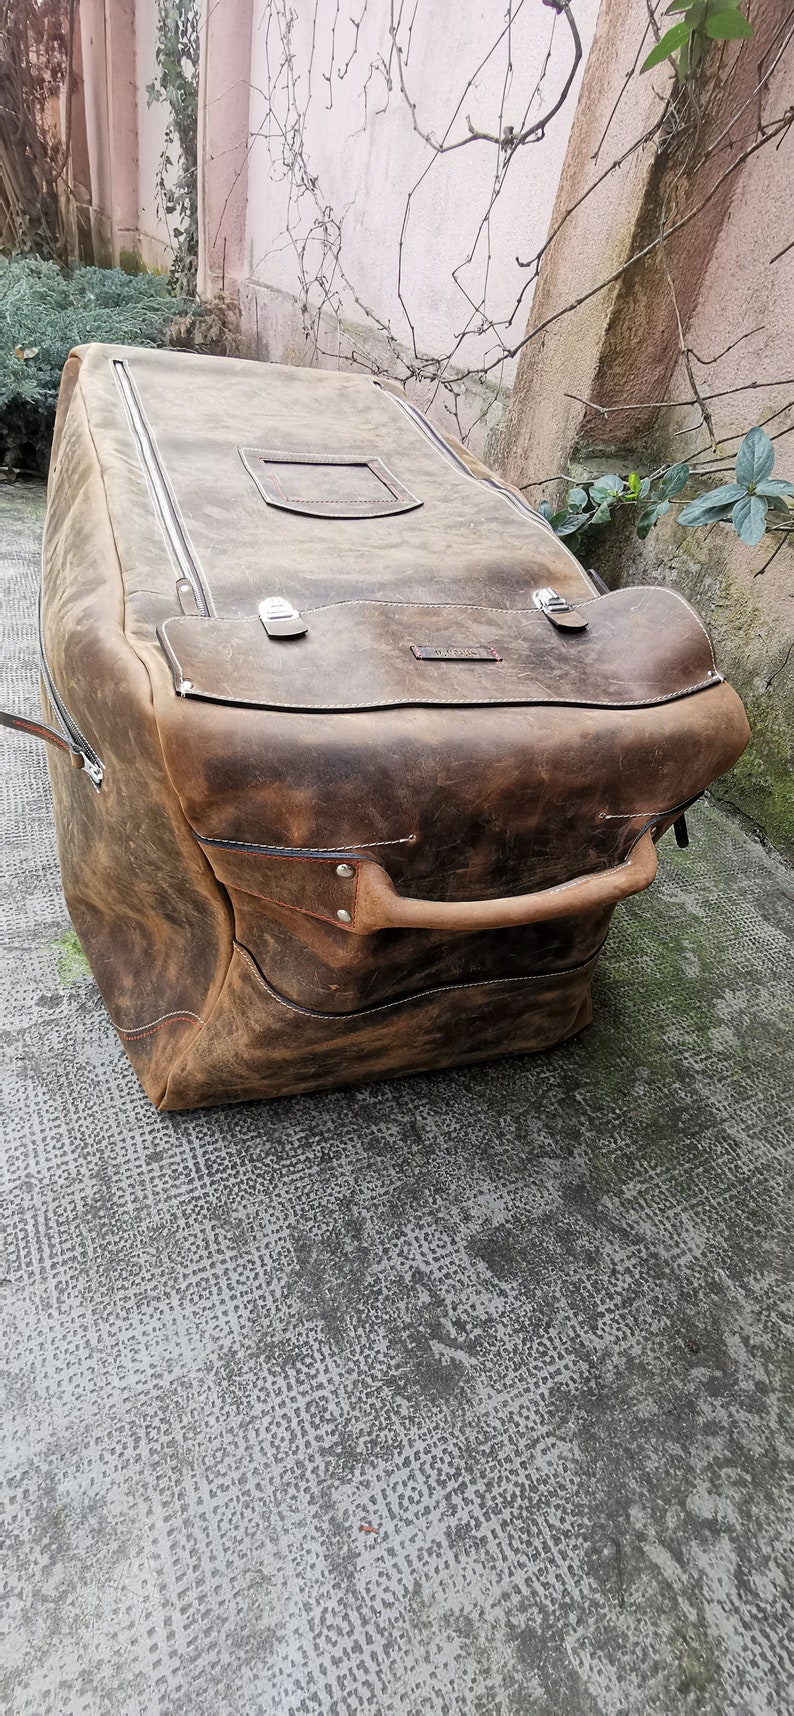 Large Family Leather Luggage, Handmade Leather Trolley Bag, Unique Design Stitch'd Leather Goods,Travel Leather Bag, Rolling Luggage image 5